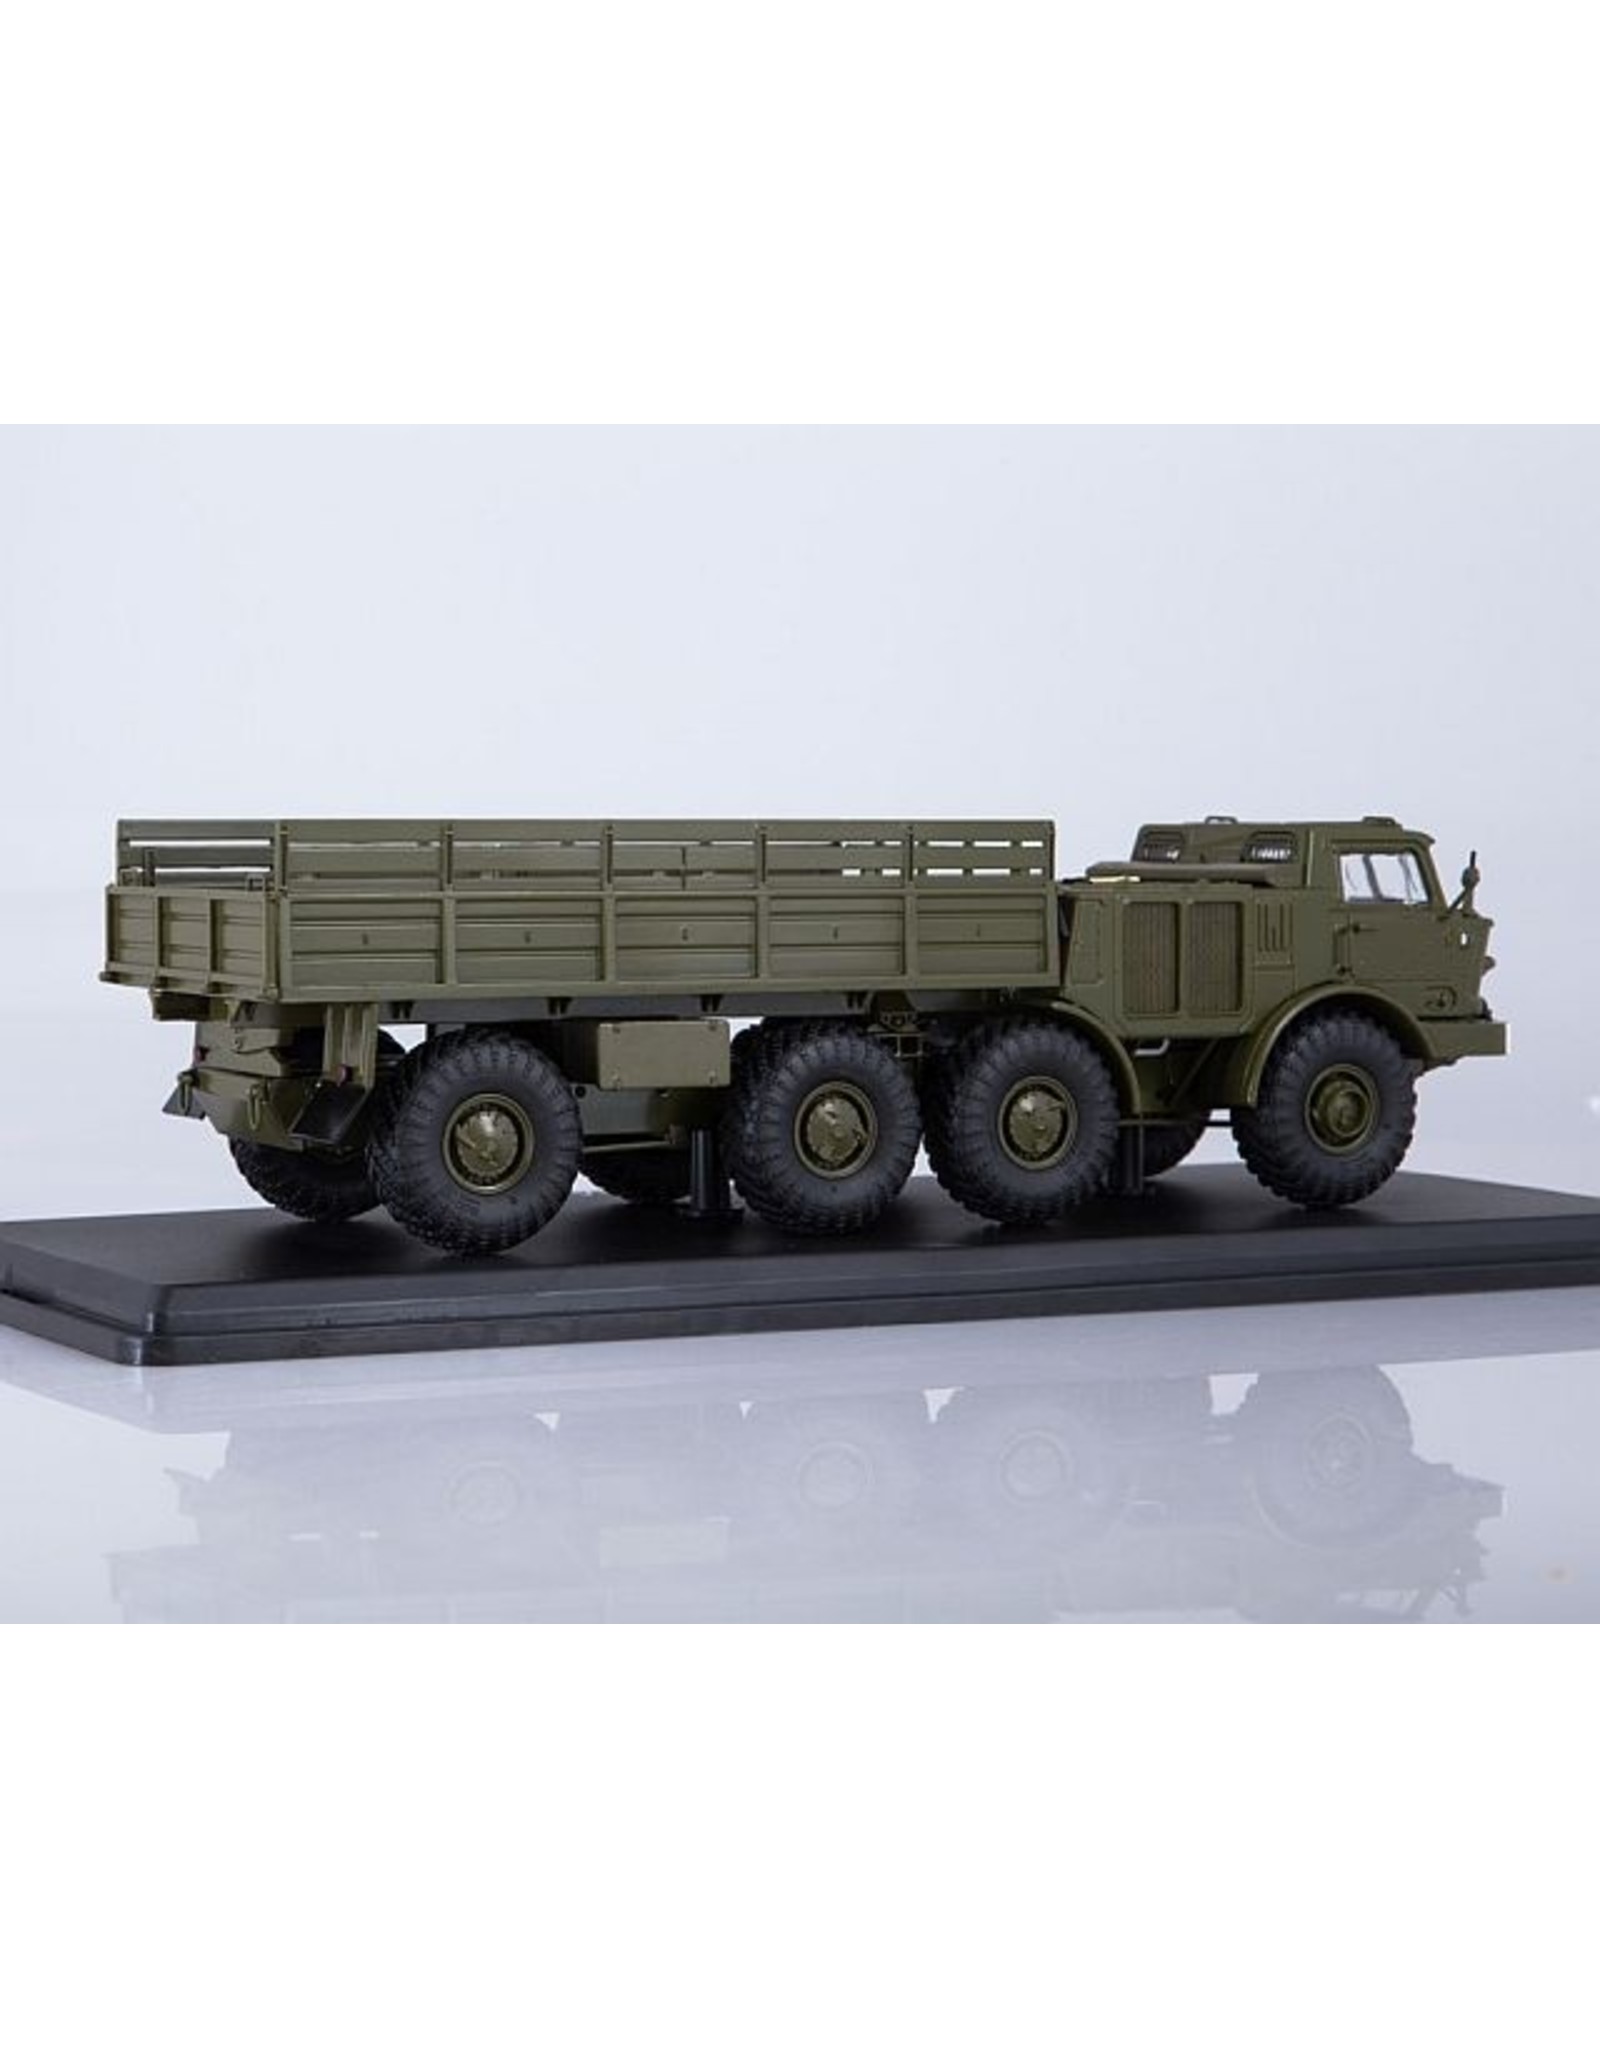 ZiL ZiL-135LM MILITARY TRUCK